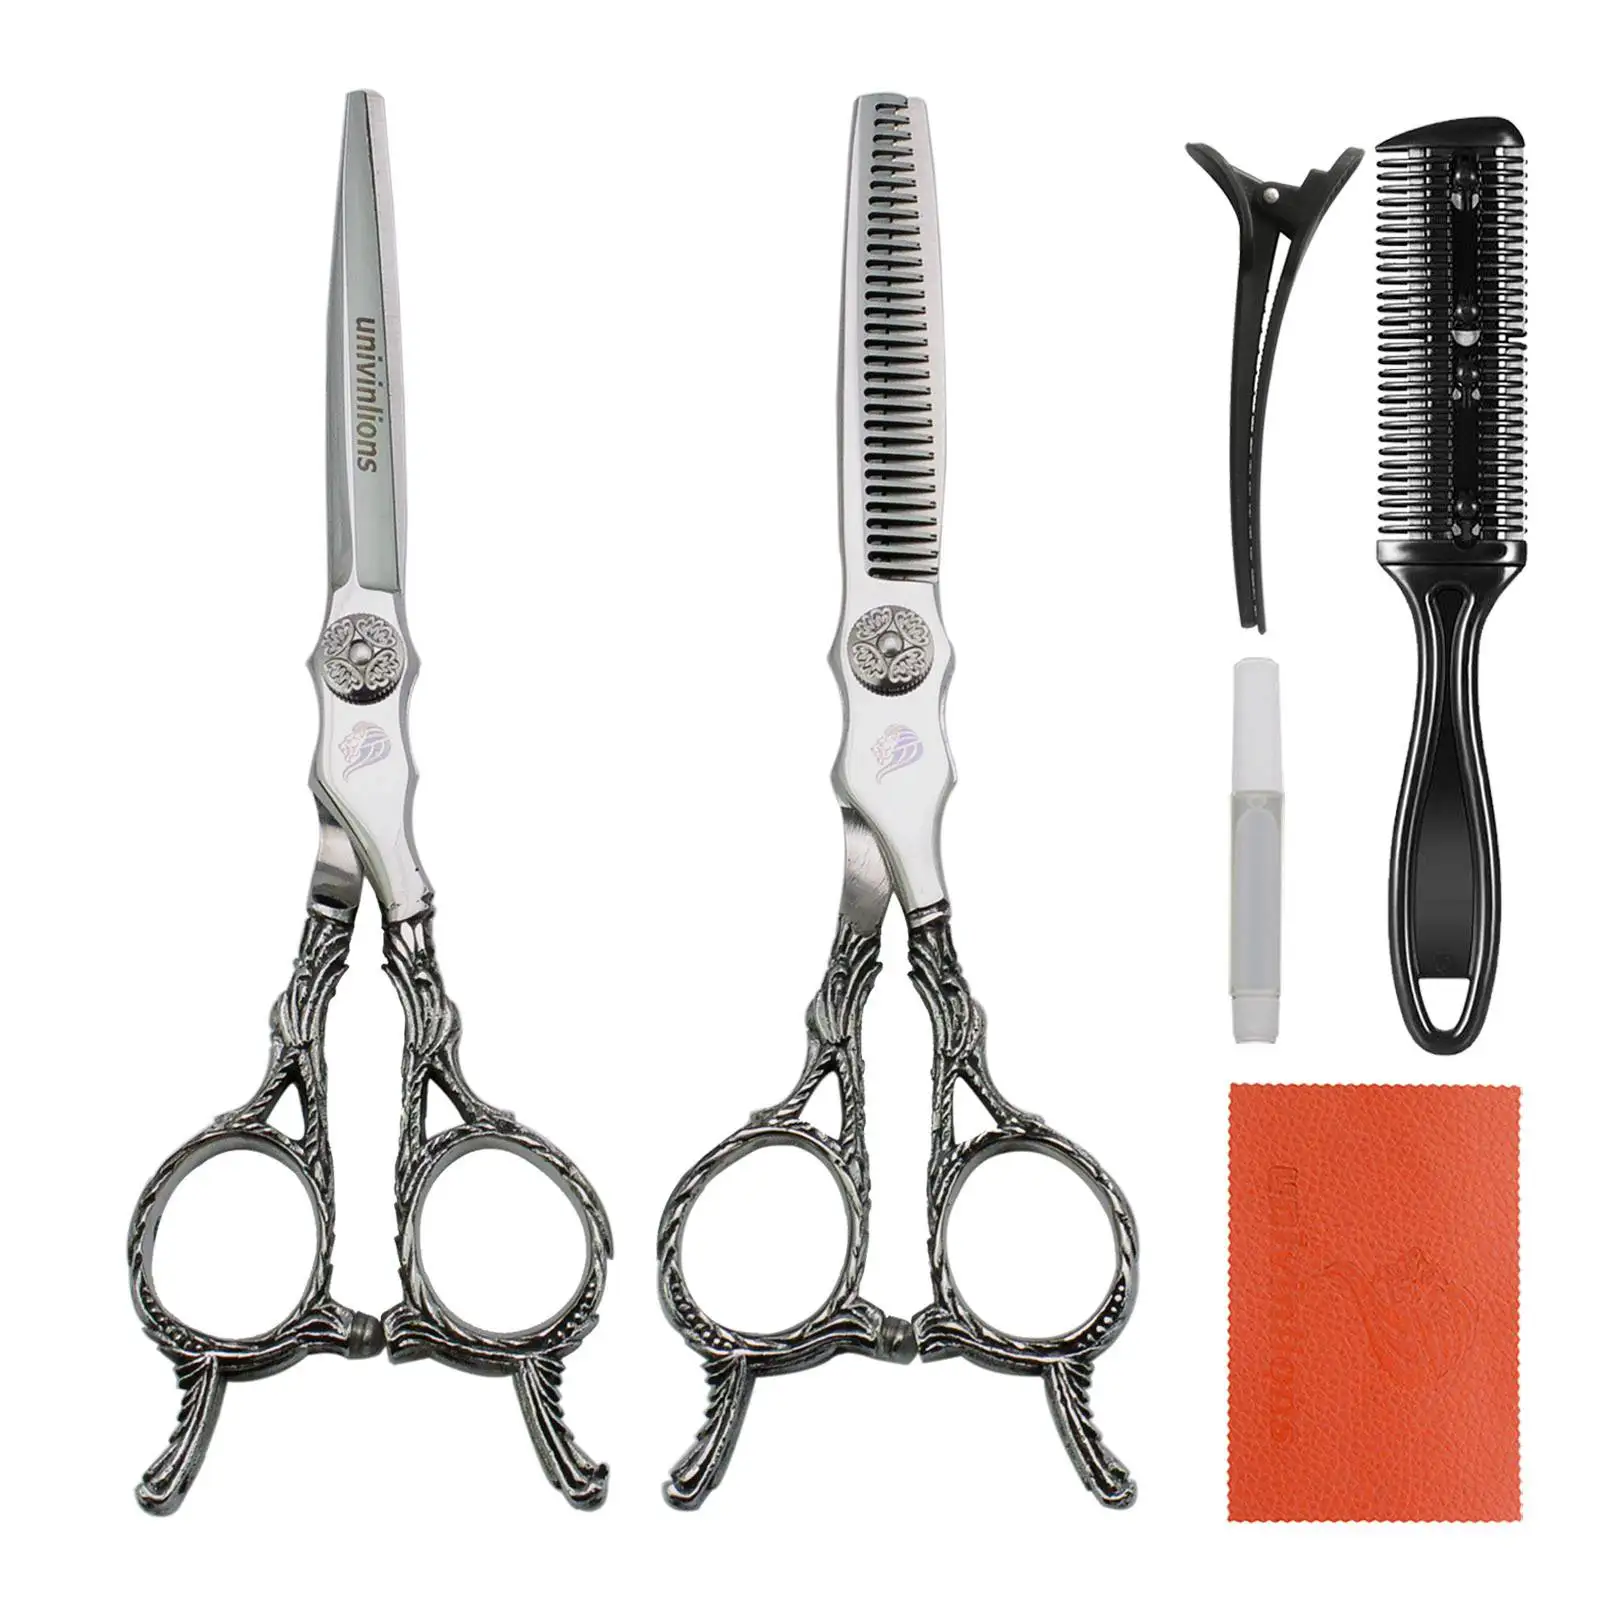 

Univinlions 6" Professional Hair Cutting Scissors Hairdressing Scissors Symmetrical Handle Thinning Shears Barber Accessories